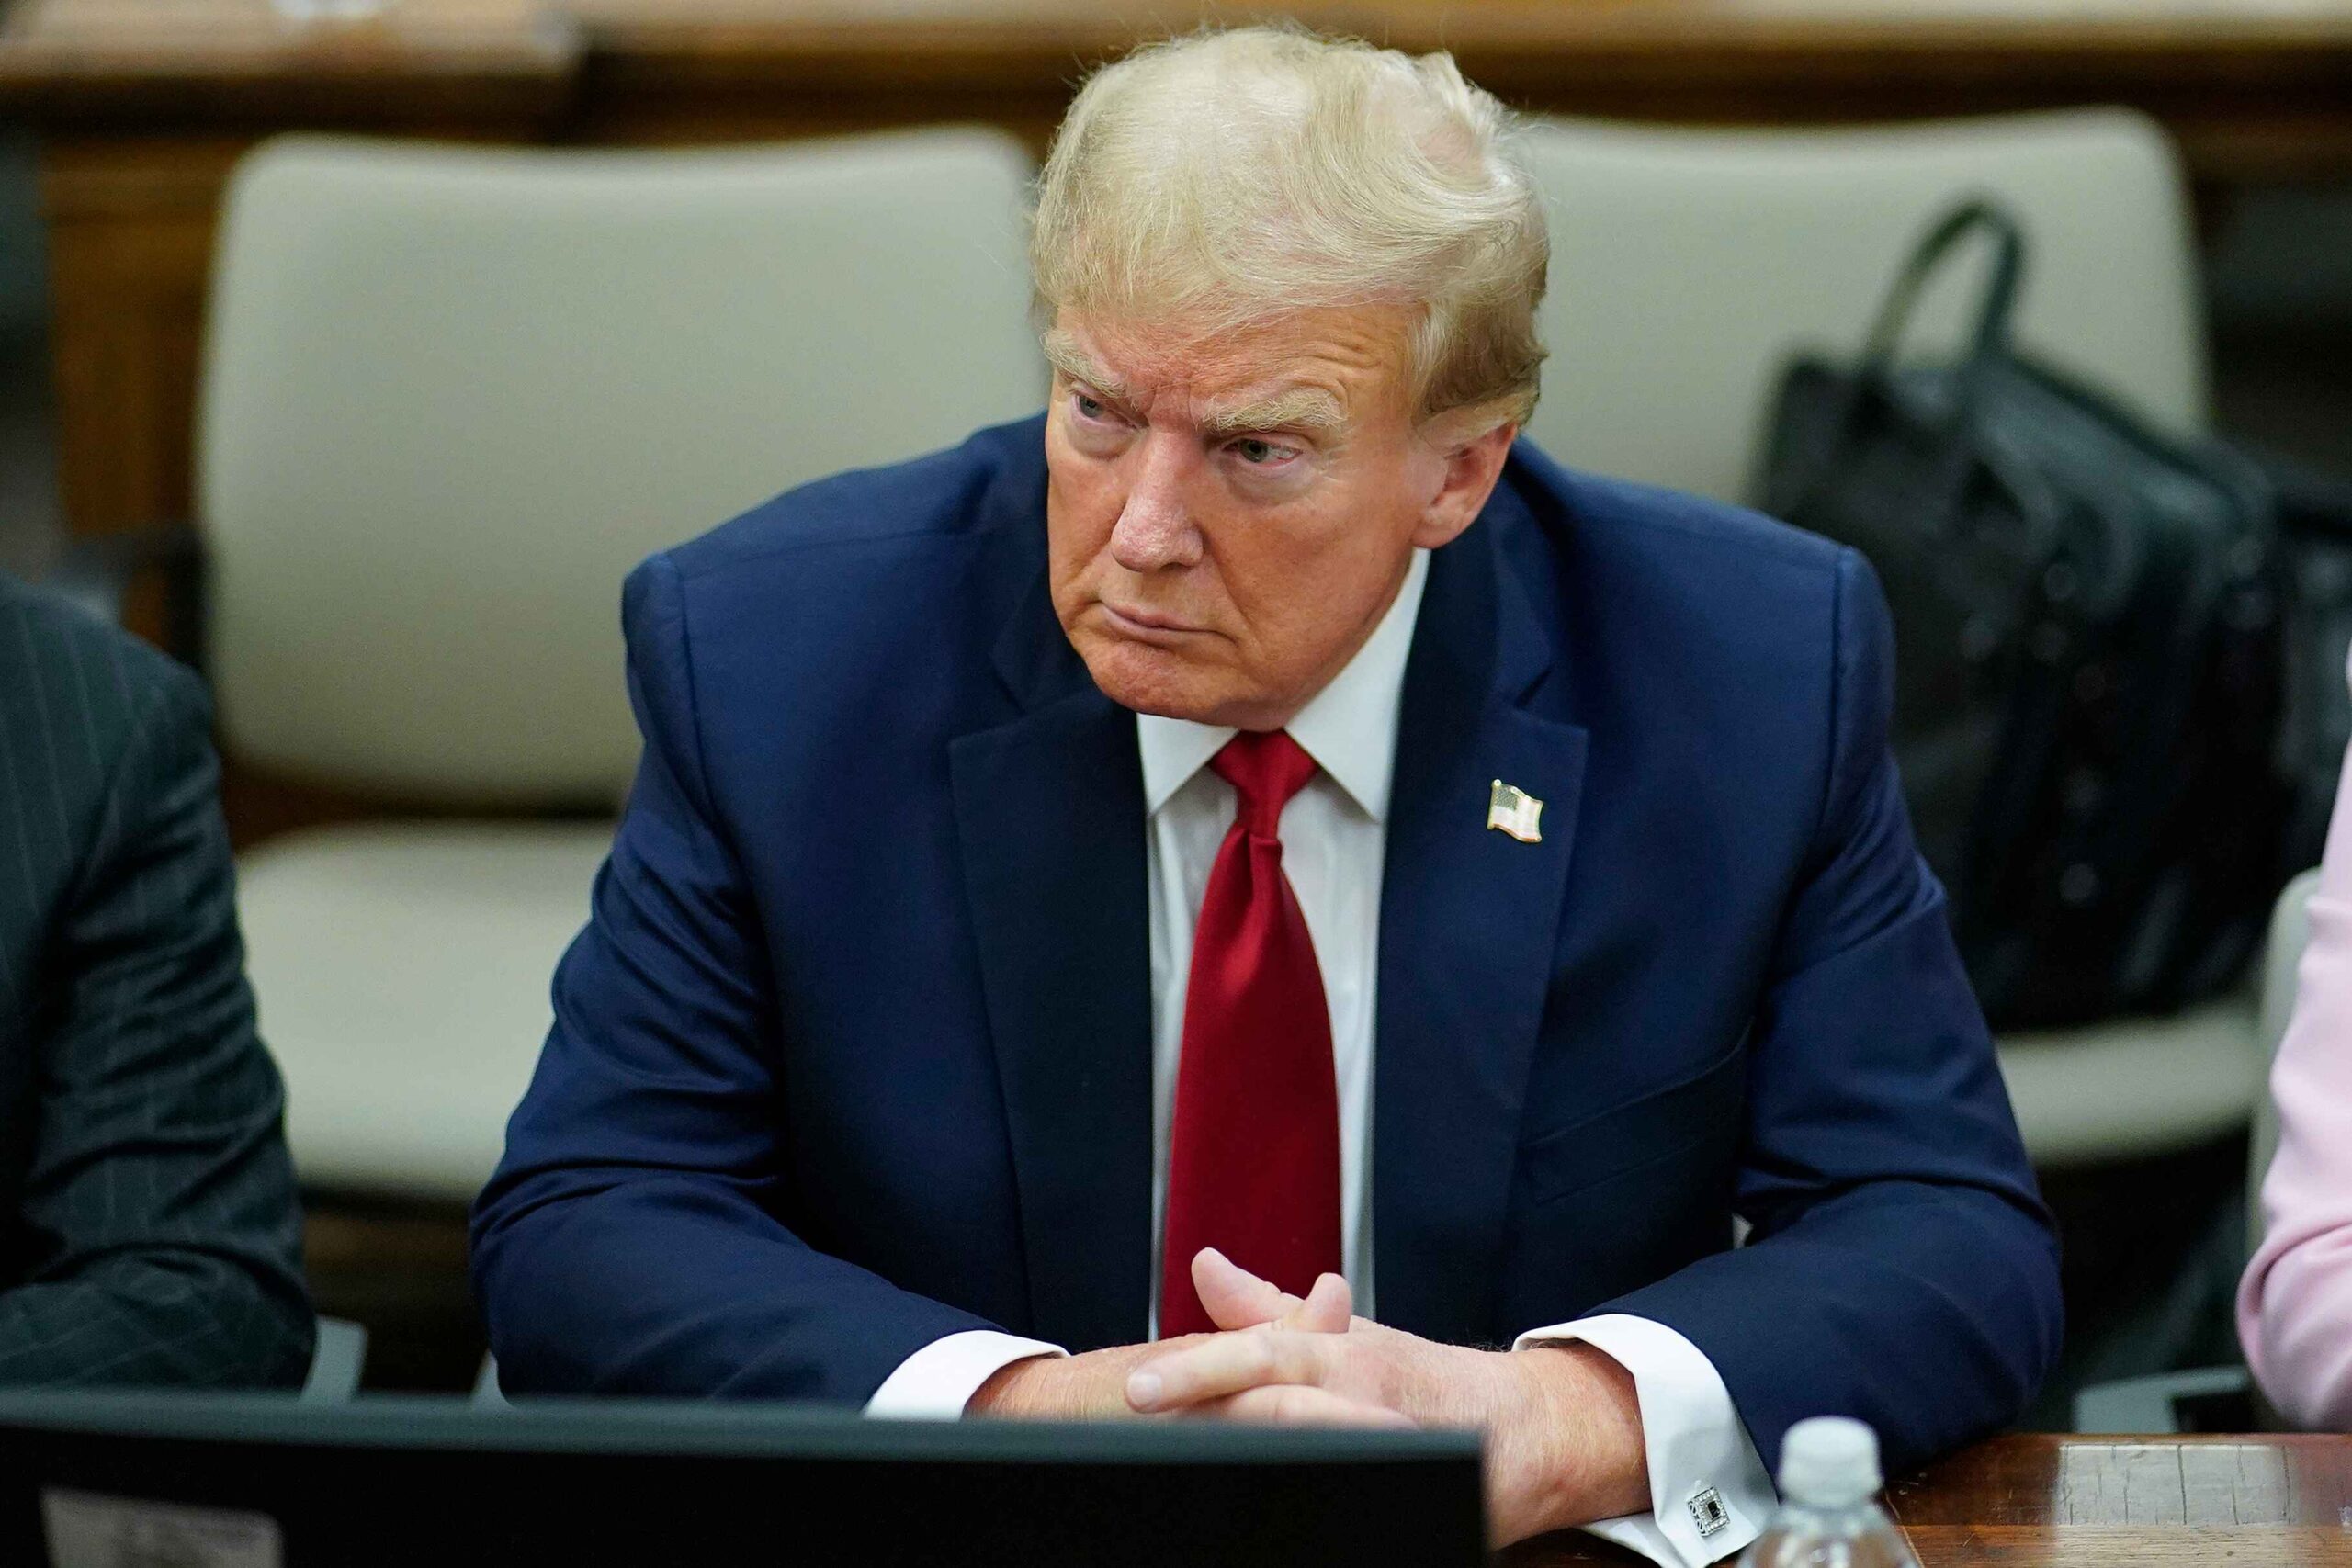 Special Counsel Jack Smith is asking the Supreme Court for an emergency ruling on whether Donald Trump is immune from prosecution for election interference. (AP Photo/Eduardo Munoz Alvarez, Pool, File)